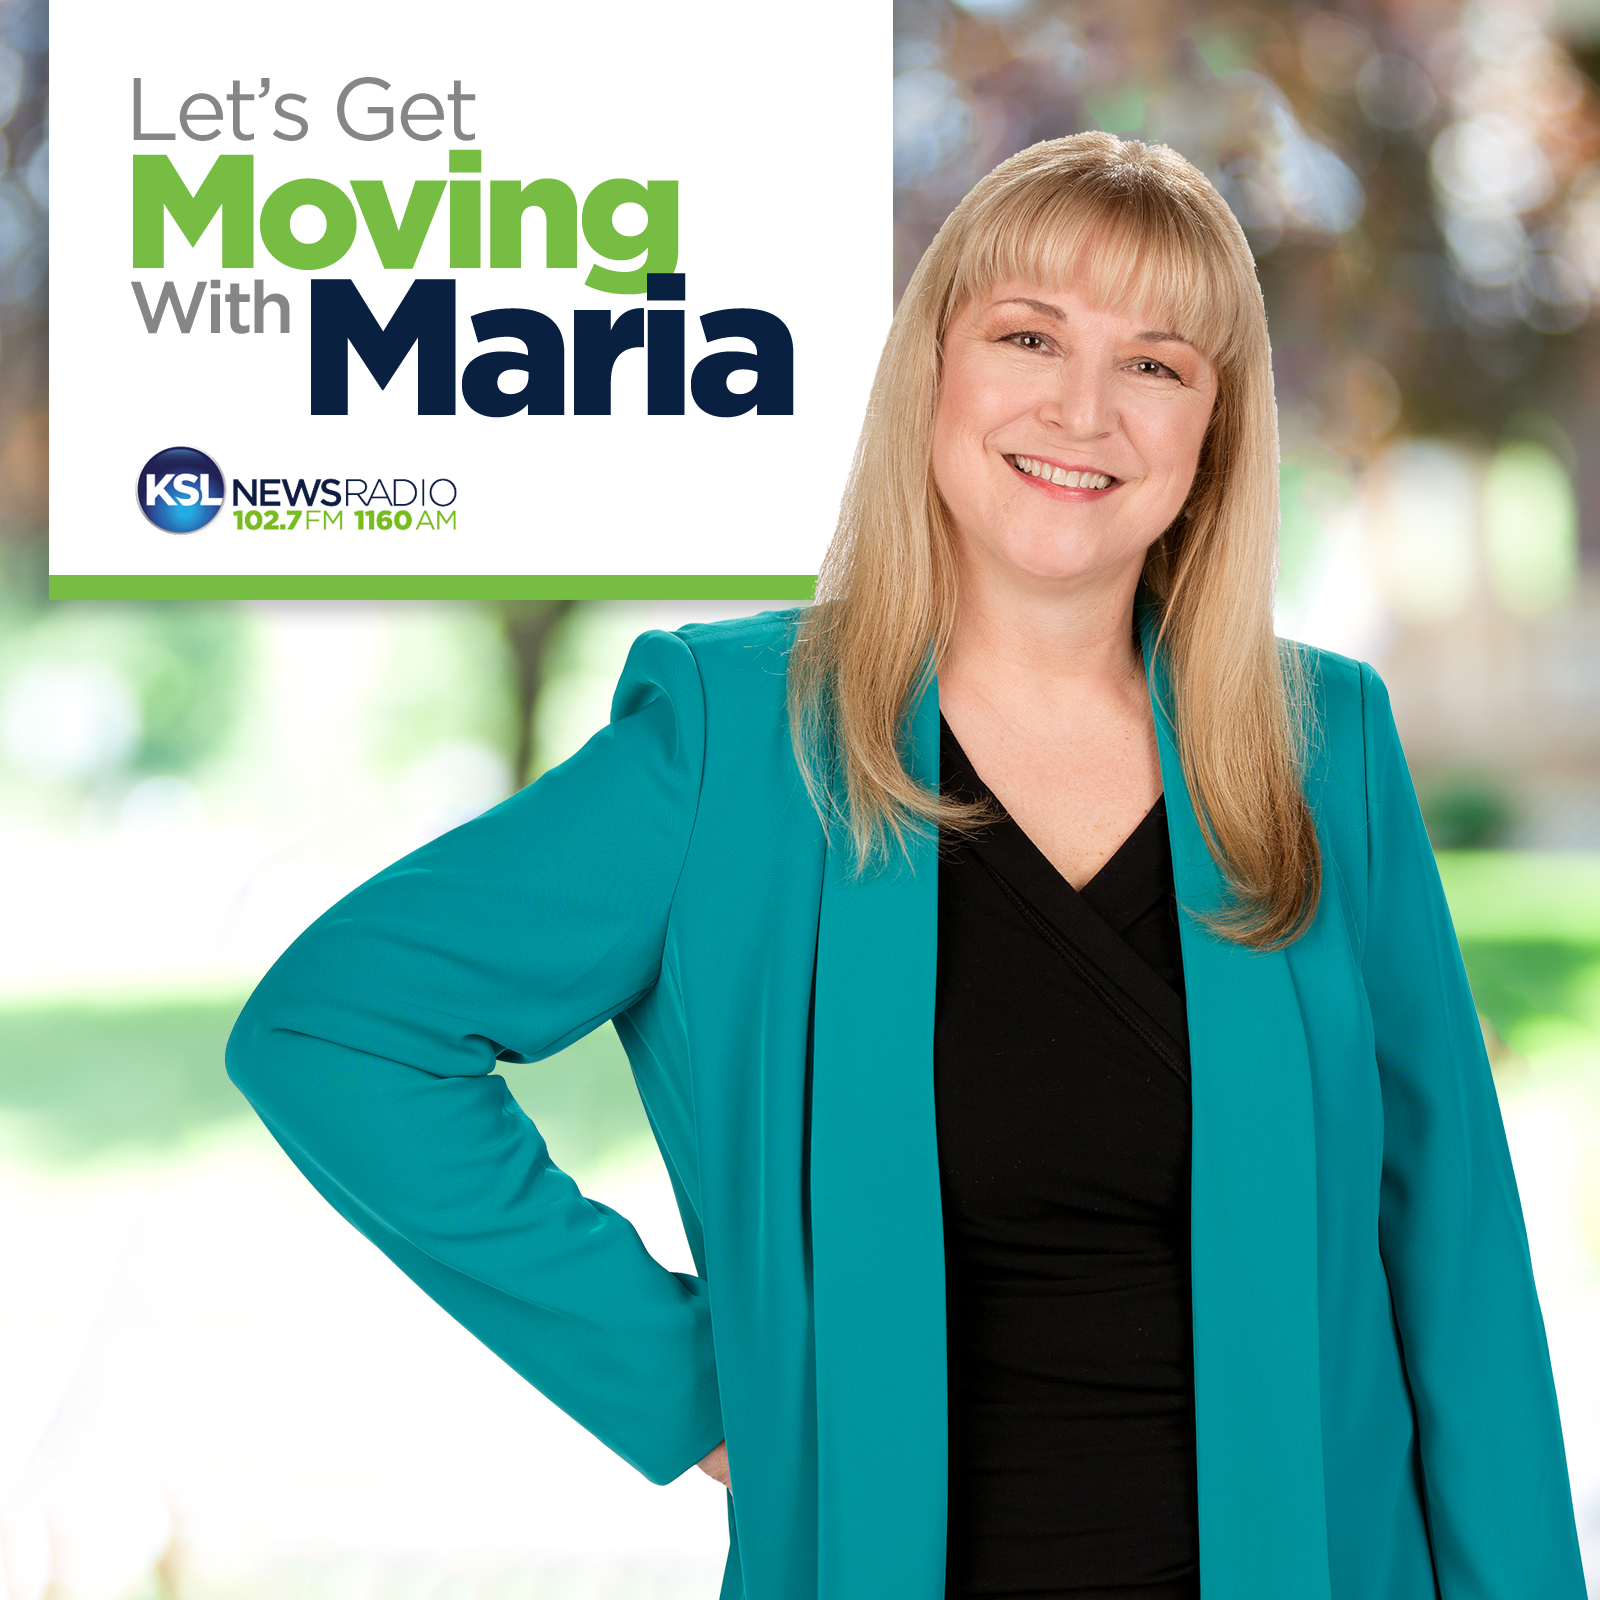 Let's Get Moving with Maria